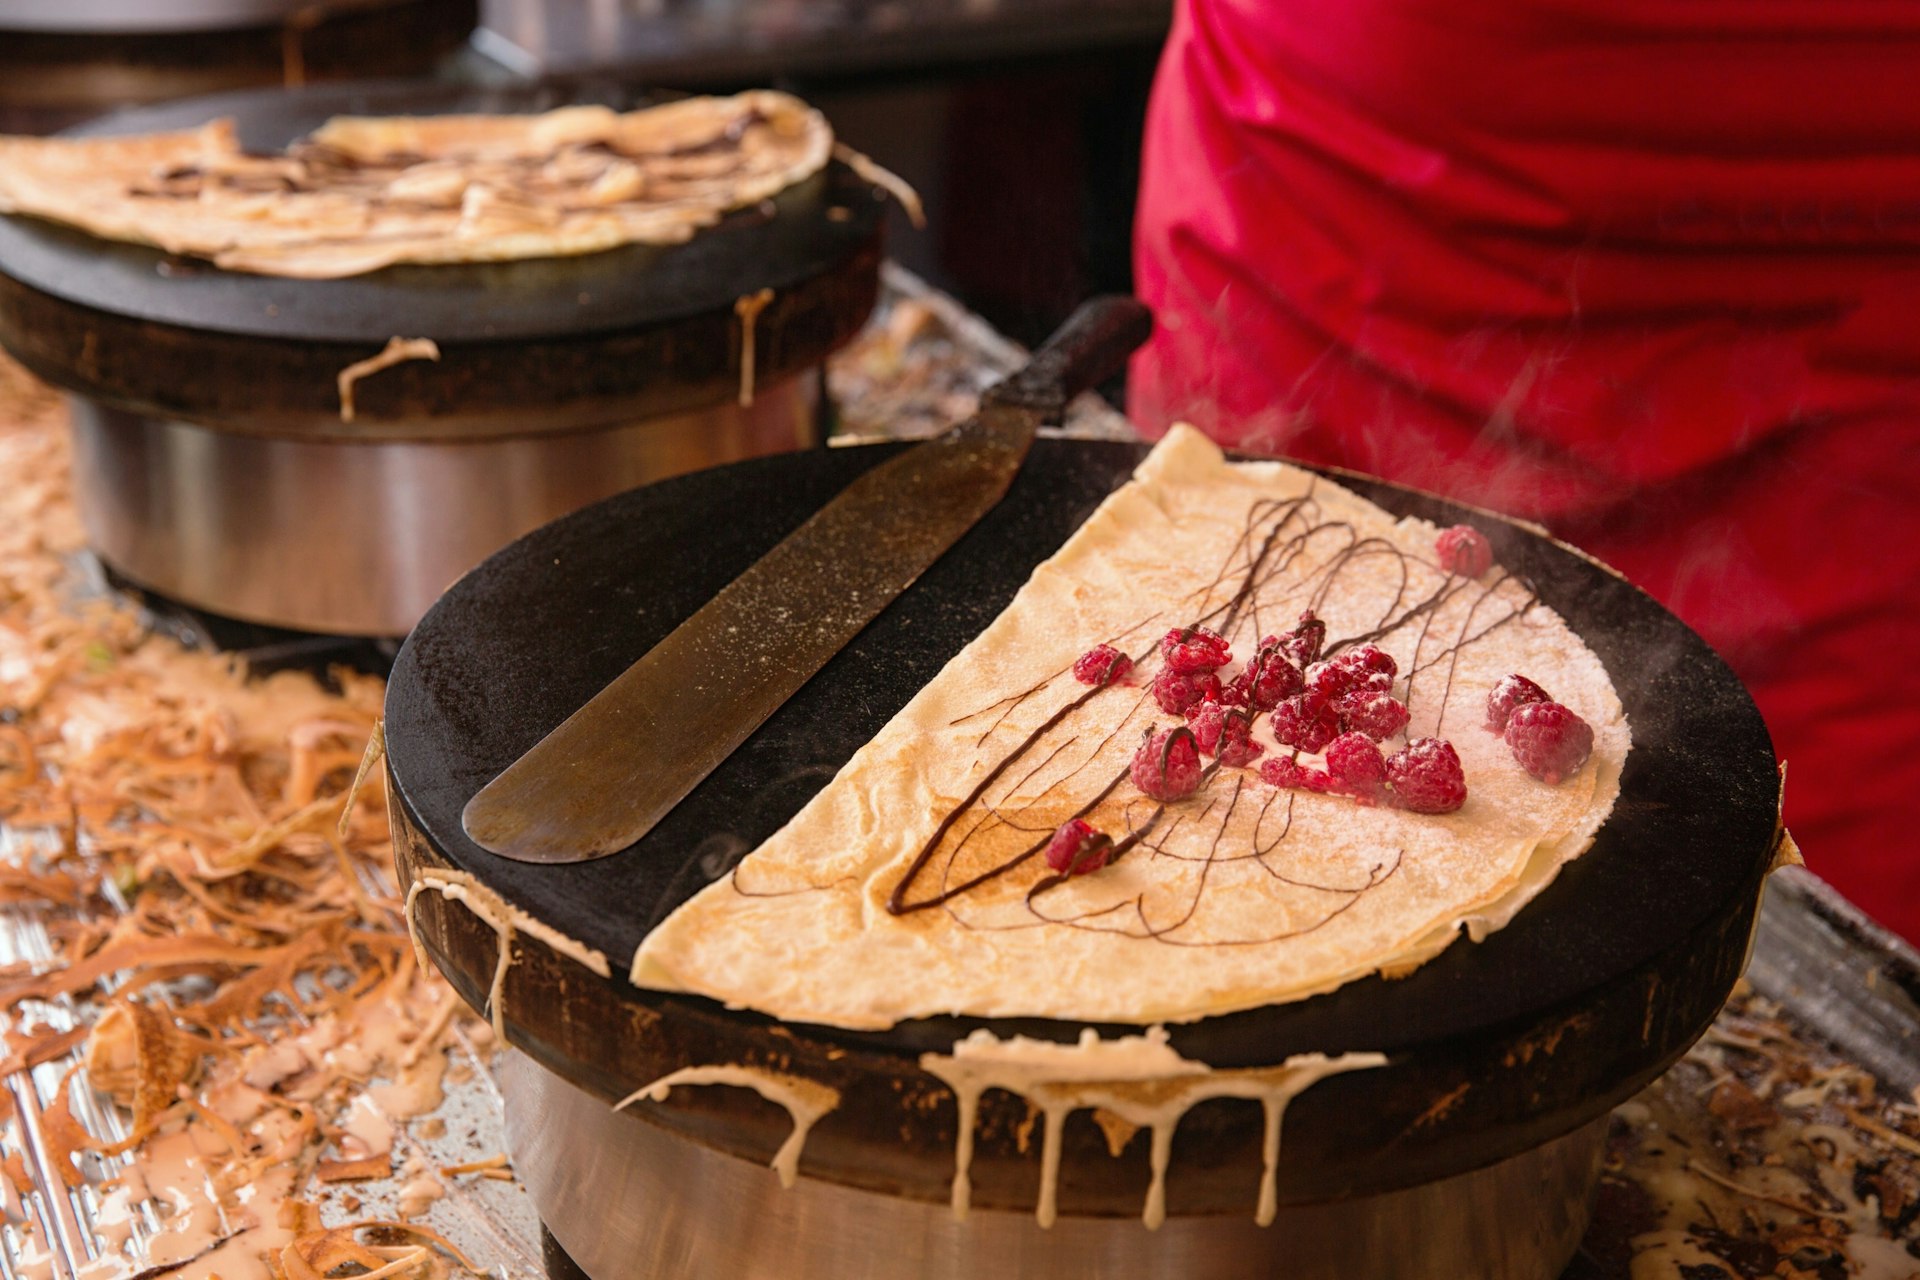 A crepe pancake with raspberries made by a Paris street vendor